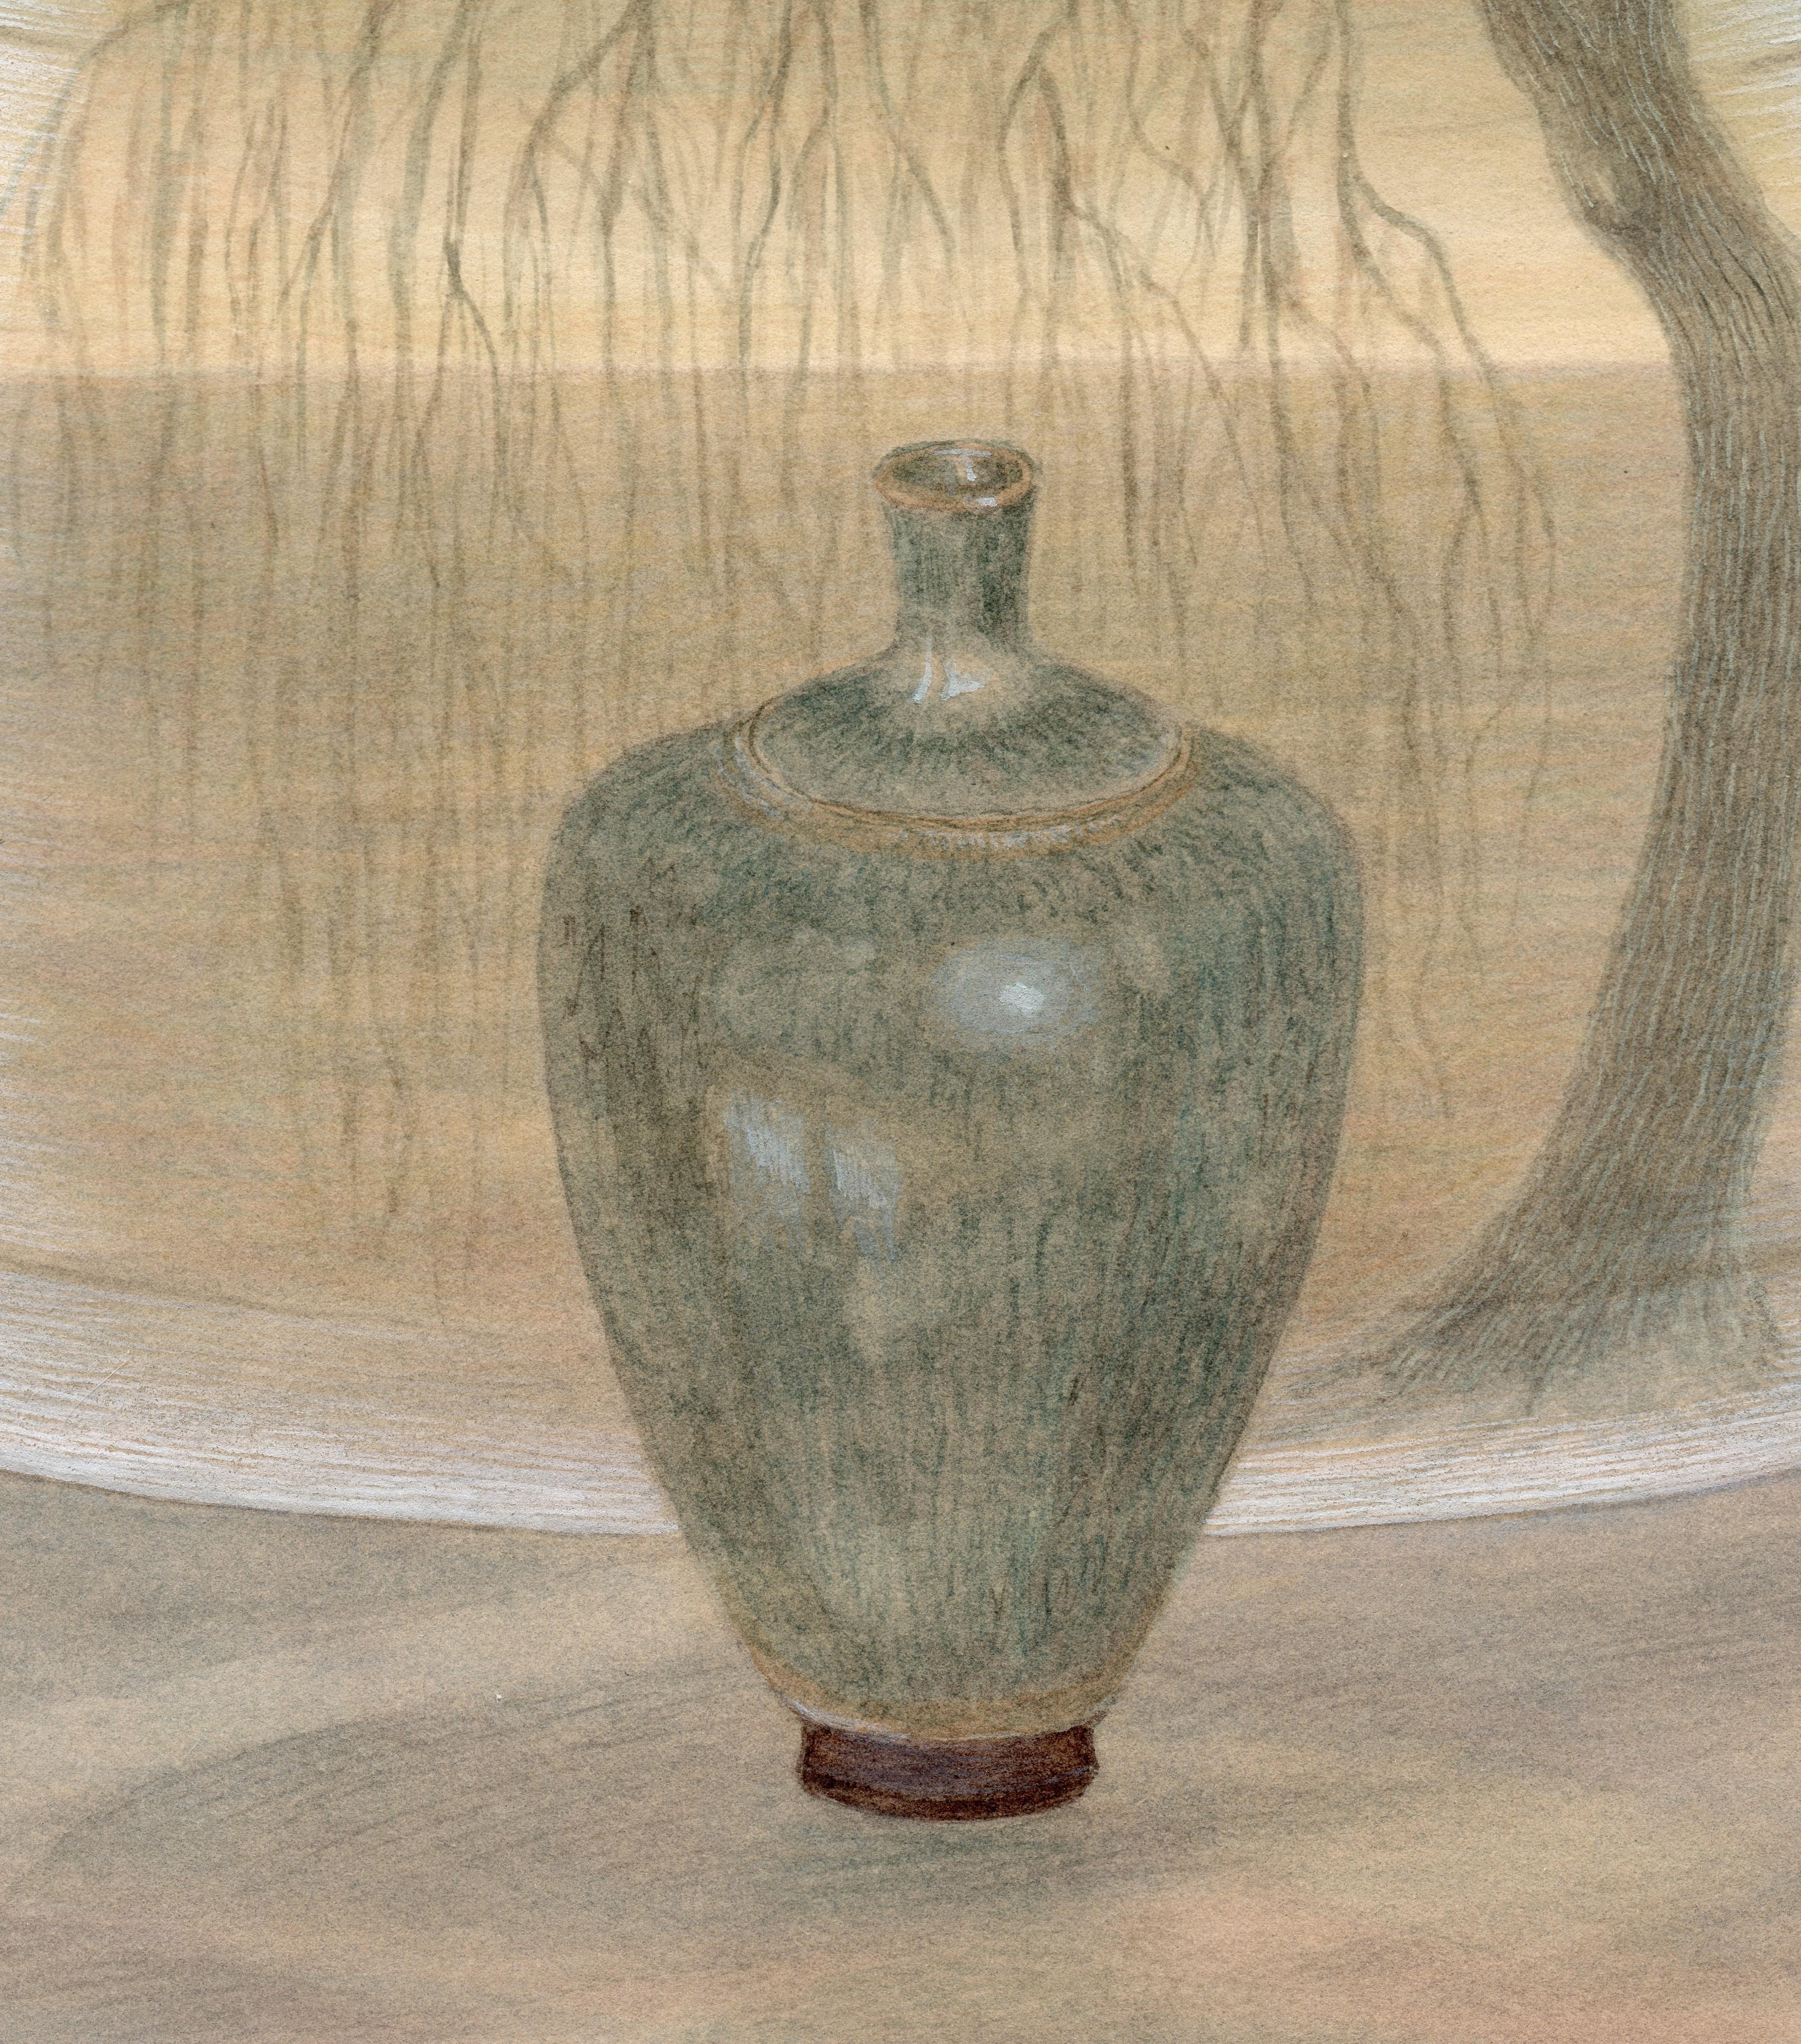 Willow - Botanical Watercolor & Gouache on Paper with Single Bud Vase and Tree - Art by Christina Haglid